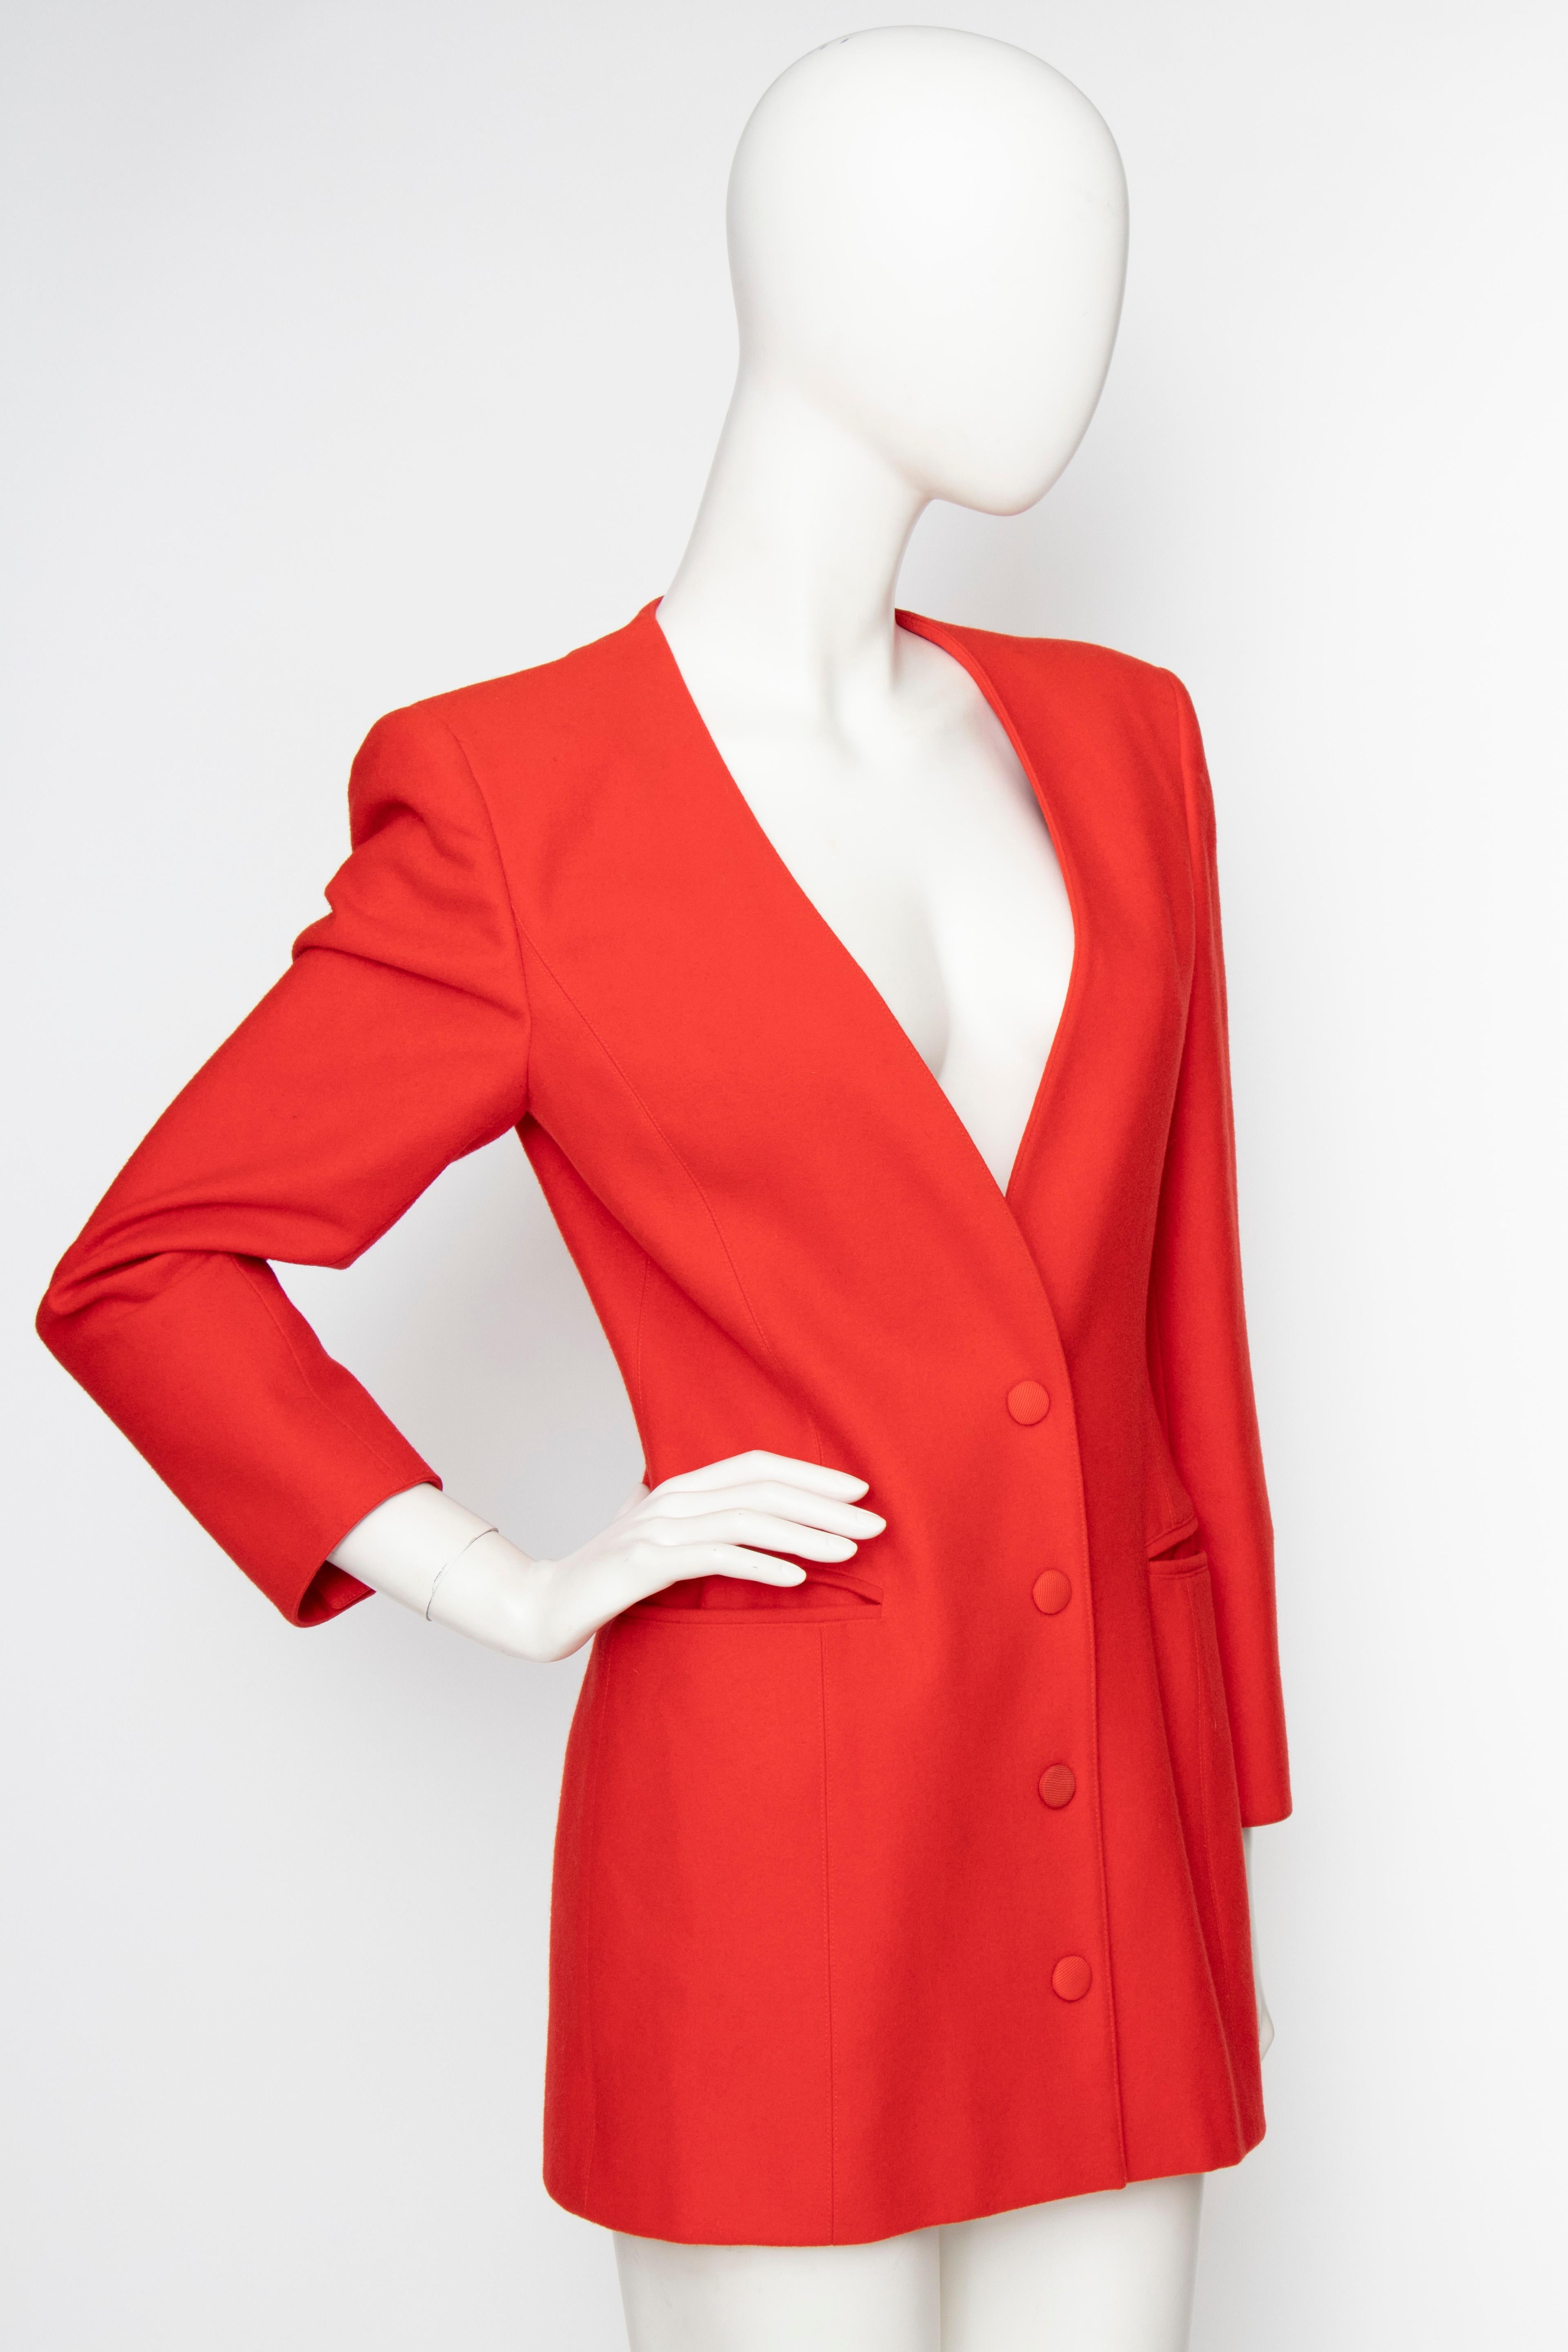 A 1980s vintage Claude Montana bright tangerine wool blazer with a v.neck front, push buttons and wide shoulders with shoulder-padding. The blazer is fully lined.

The size of the blazer corresponds to a modern size Medium. But please see the